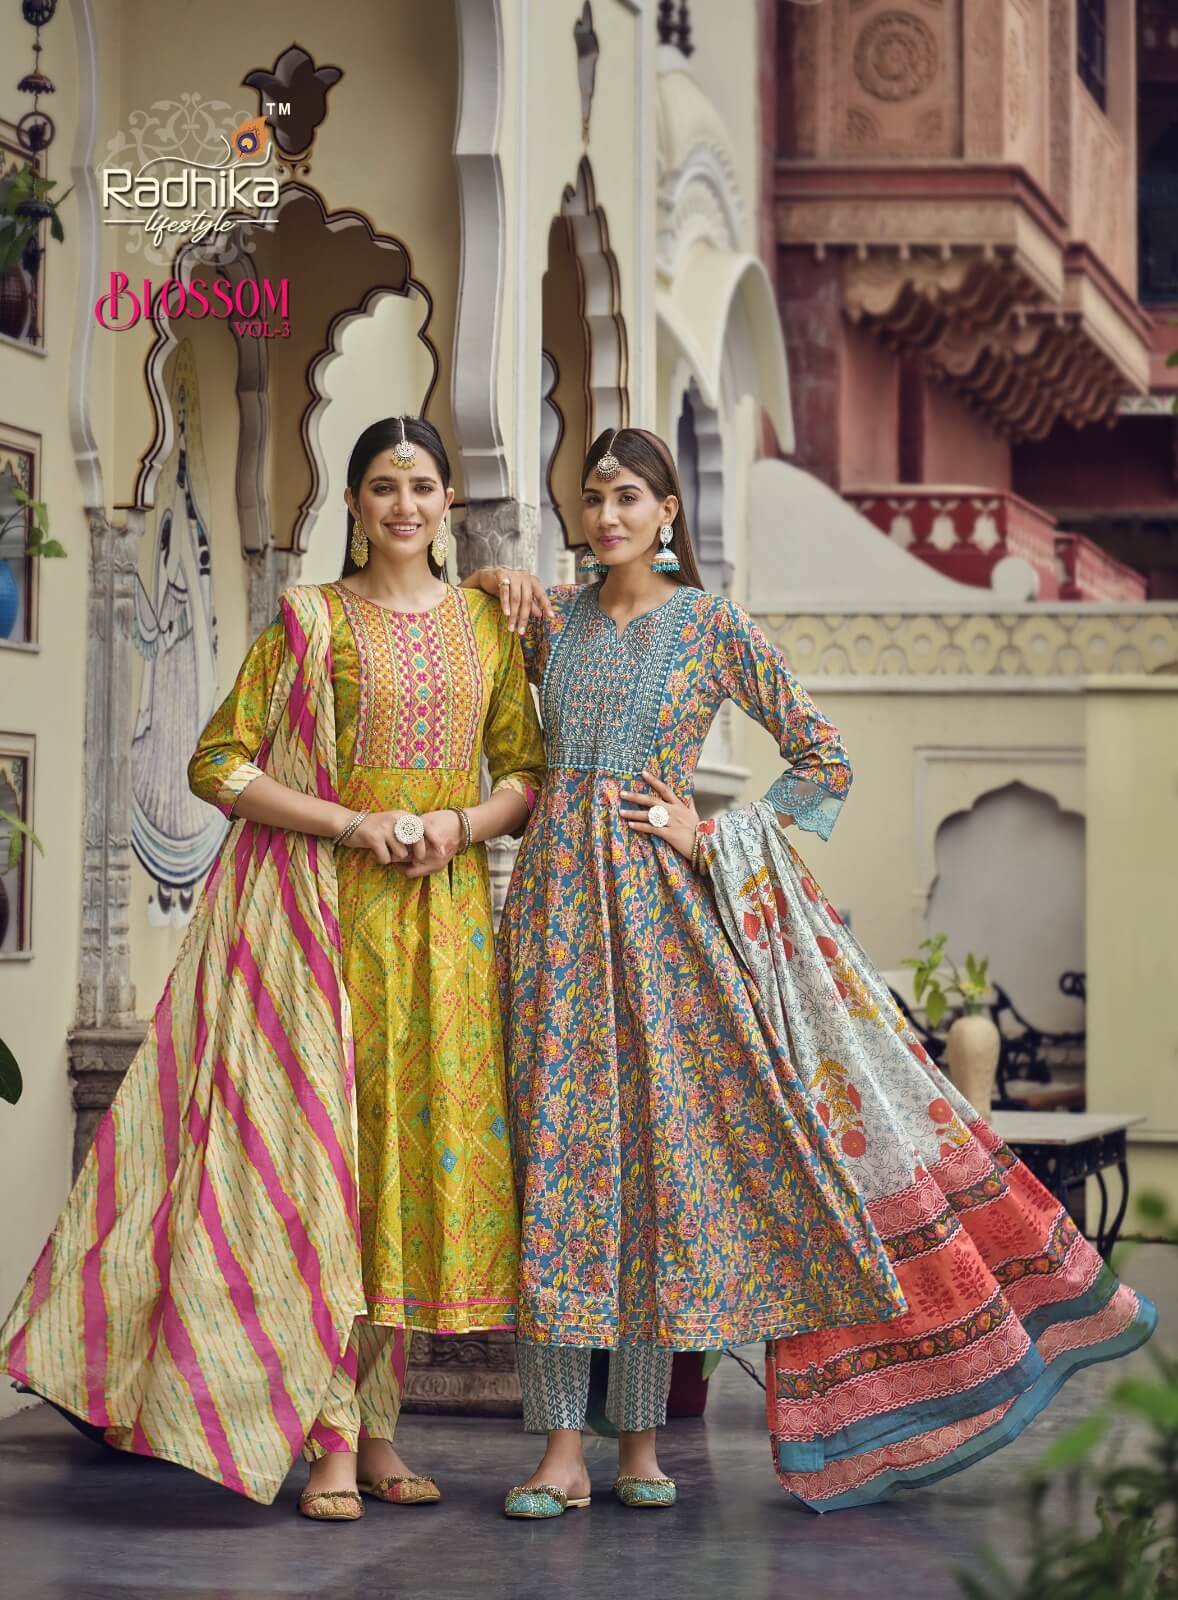 Radhika Lifestyle Blossom vol 3 Readymade Dress Catalog in Wholesale, Buy Radhika Lifestyle Blossom vol 3 Readymade Dress Full Catalog in Wholesale Price Online From Aarvee Creation